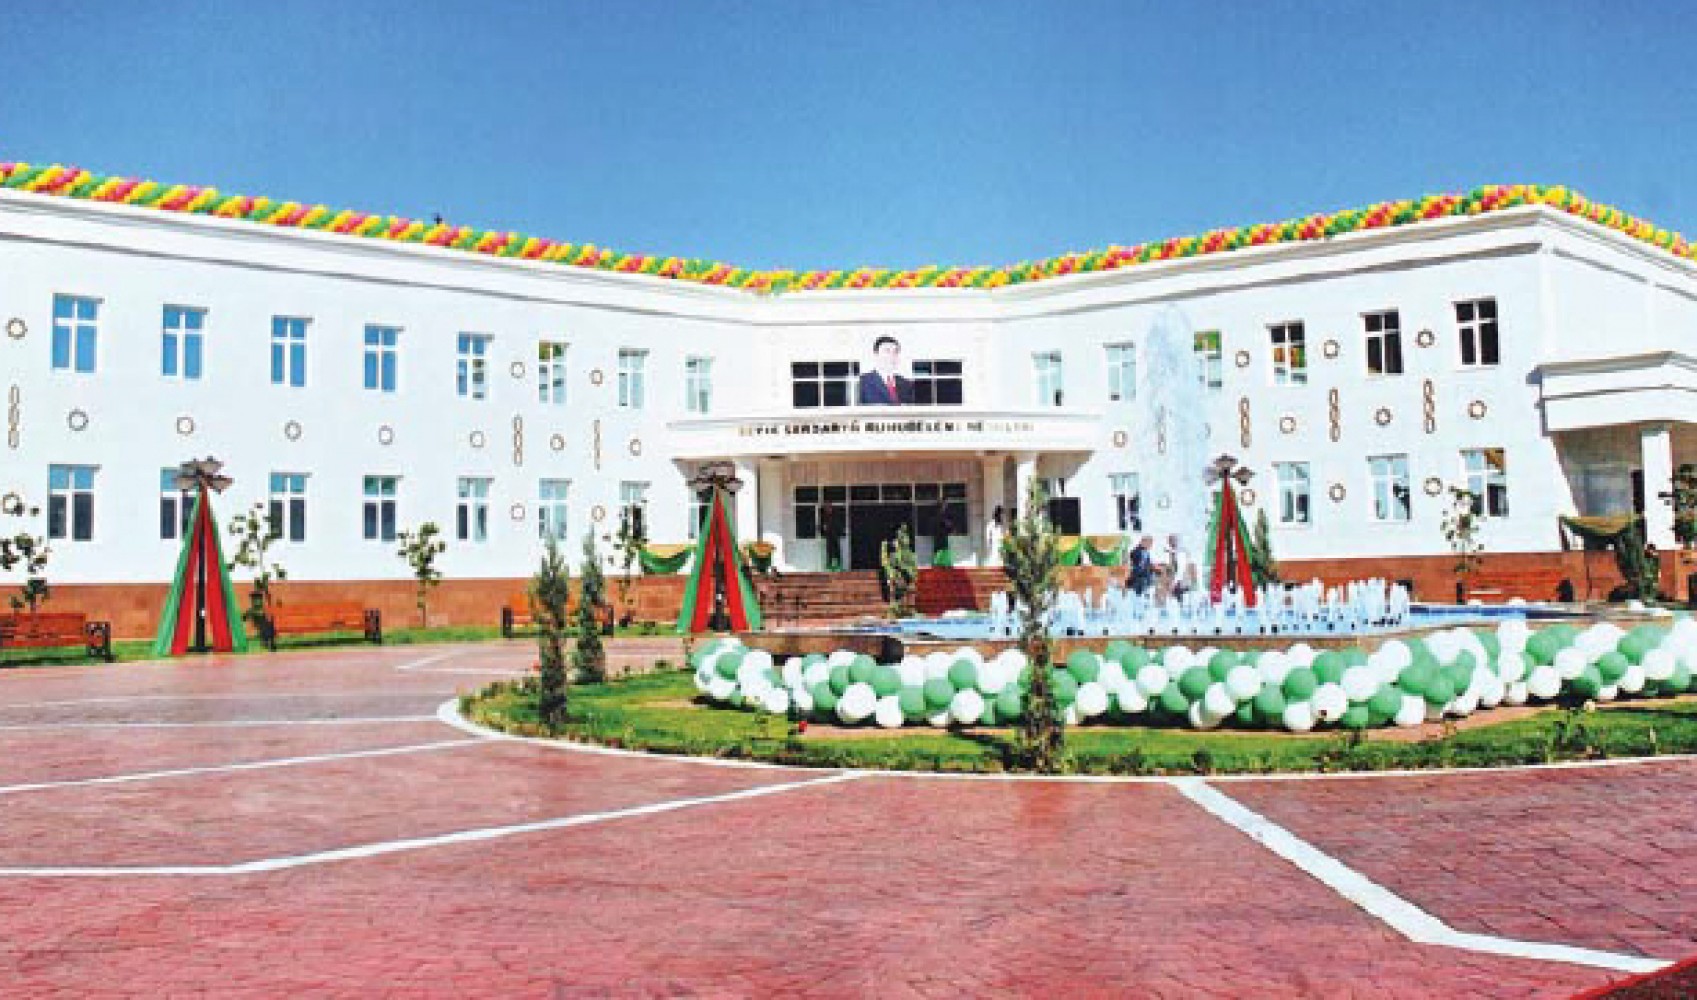 SUMMER CAMP FOR RESTING AND TRAINING OF CHILDREN OF TURKMENISTAN UNION COOPERATION